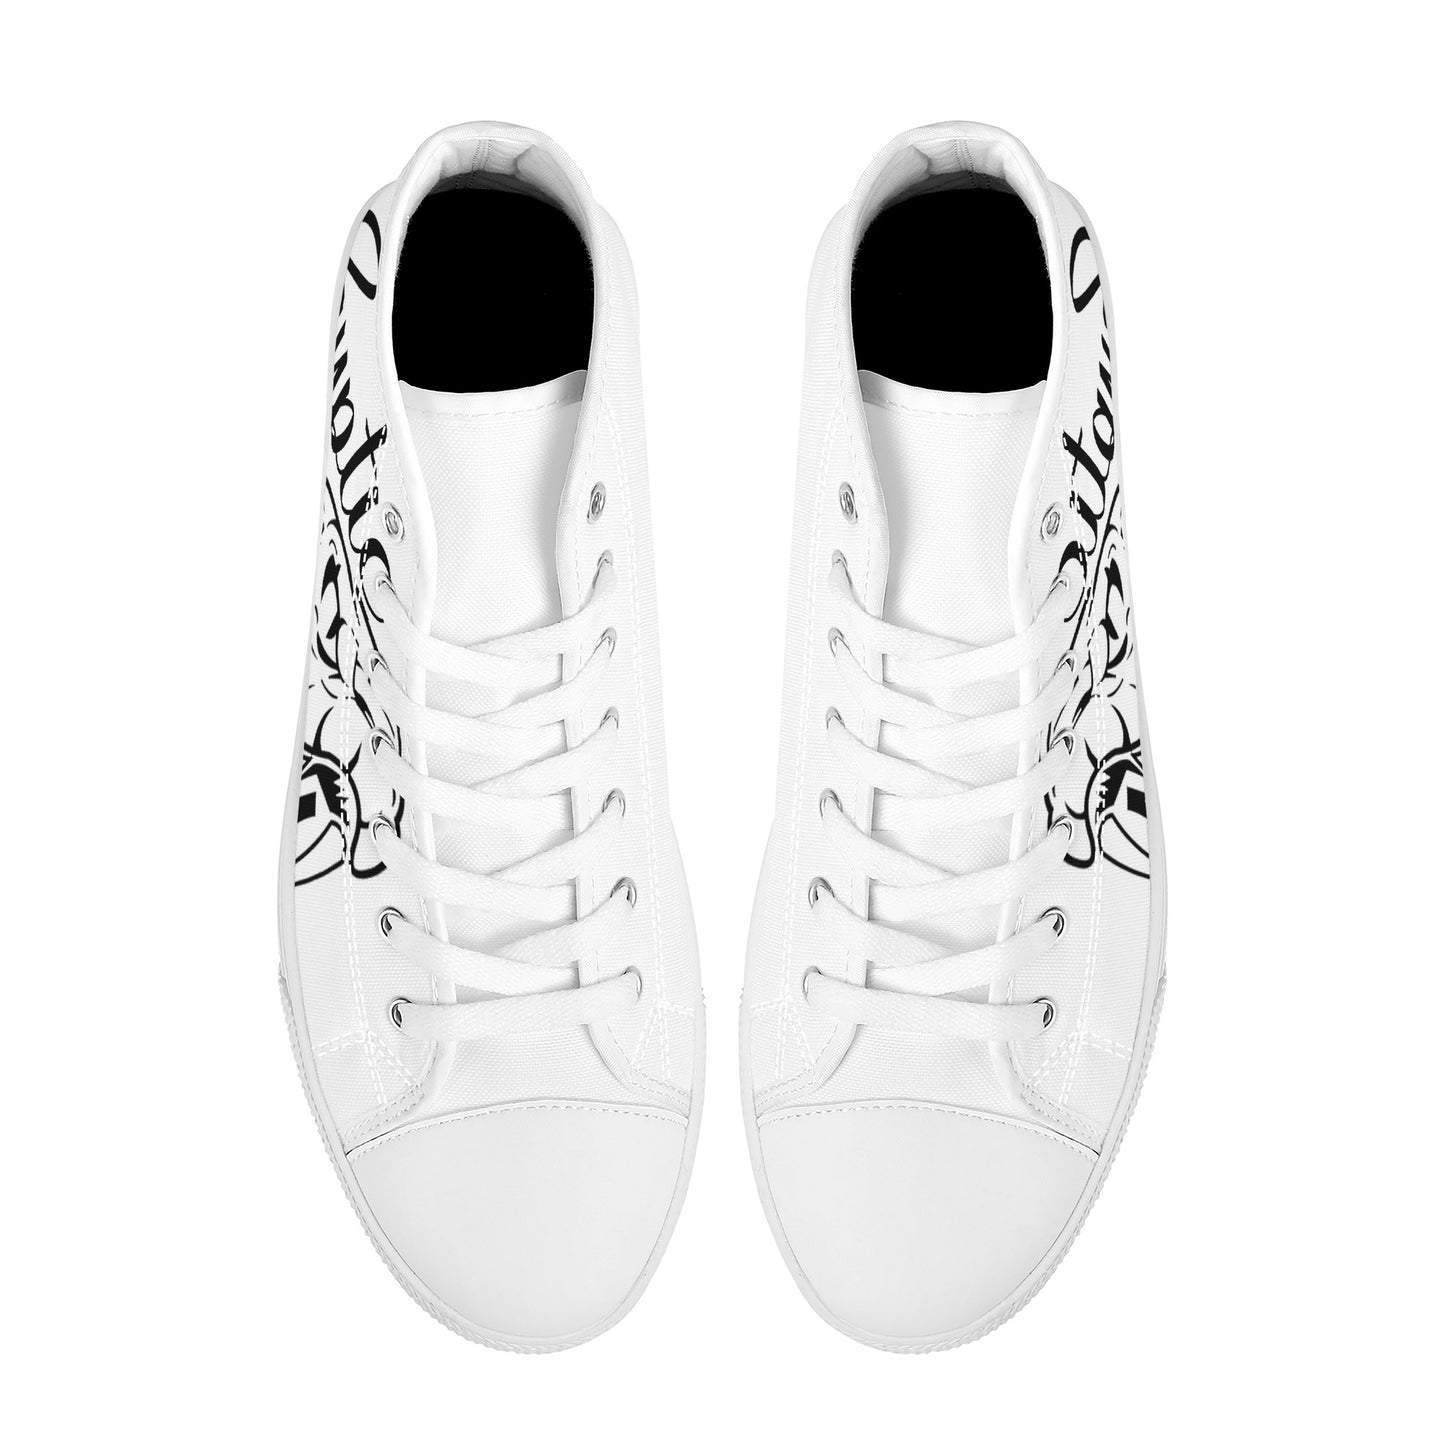 Cryptic High-Top Canvas Shoes With Customized Tongue, White